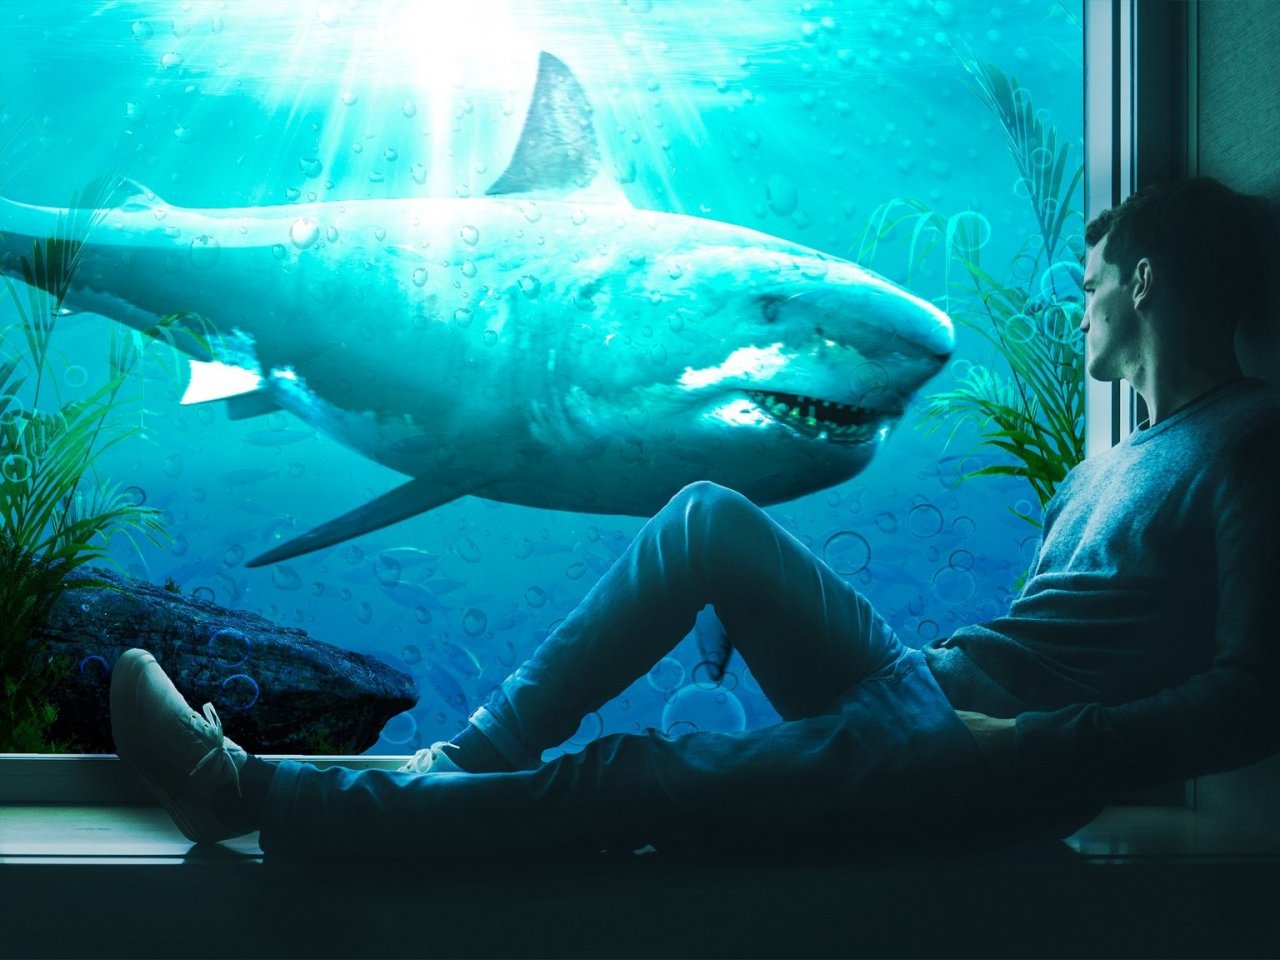 Shark behind the glass jigsaw puzzle